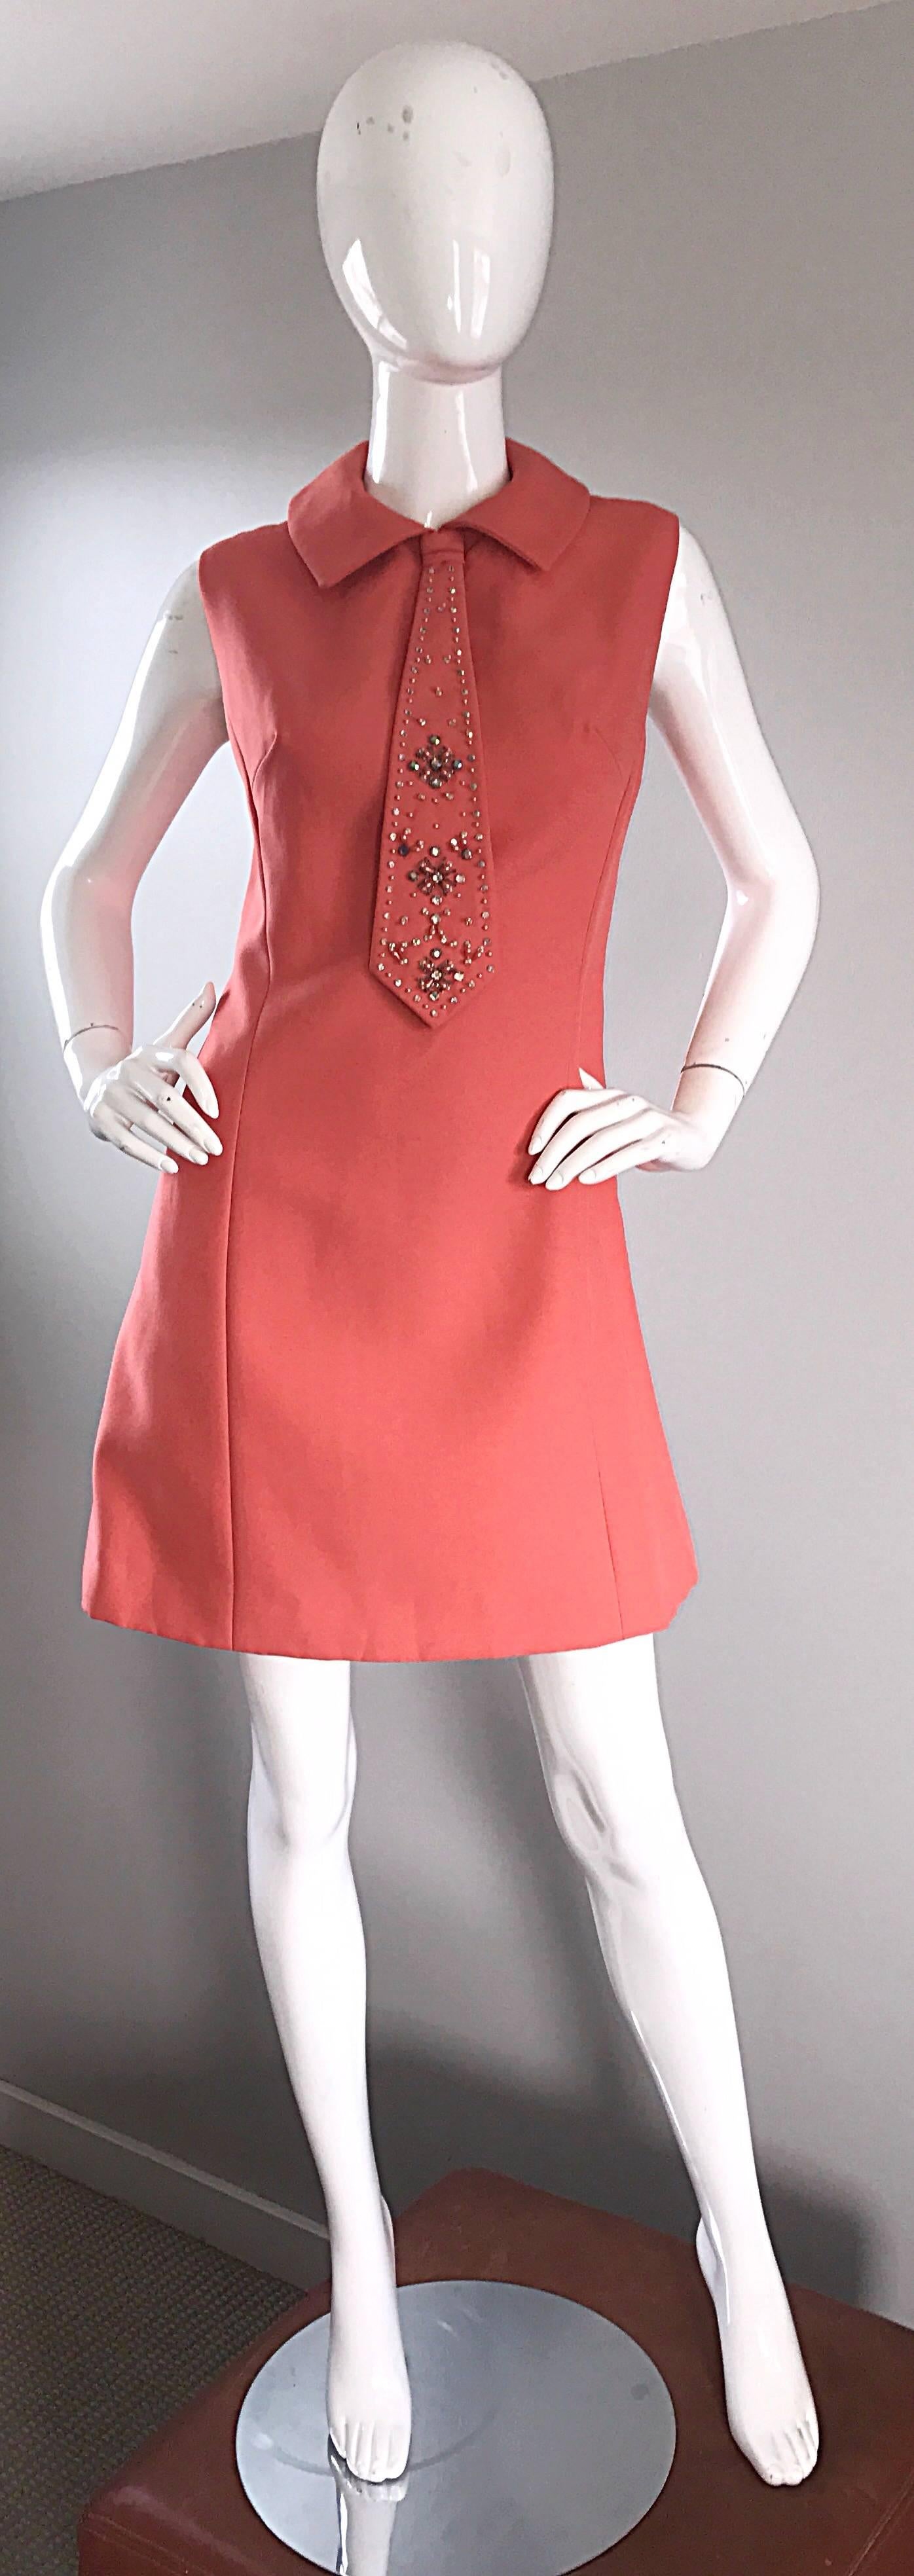 Incredibly chic 1960s coral / salmon pink colored 'necktie' A-line / shift dress! Features attached tie at the front, with dozens of beads and sequins. Flattering A-Line fit hides any flaws. Full metal zipper up the back with hook-and-eye closure.